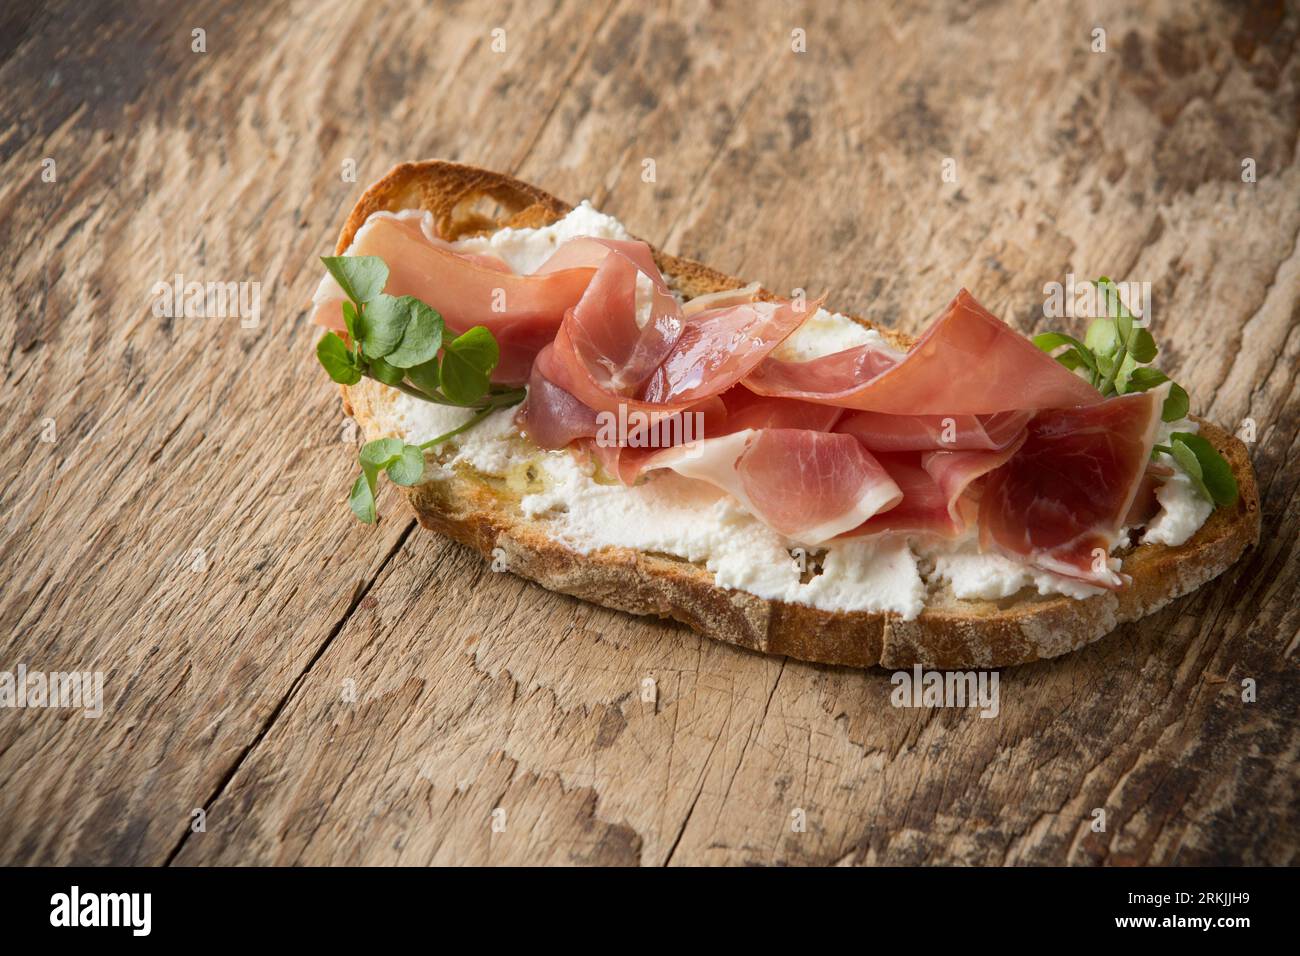 An example of bruschetta made with toasted sourdough bread, ricotta cheese and Serrano ham. Drizzled with olive oil and garnished with watercress. Pre Stock Photo